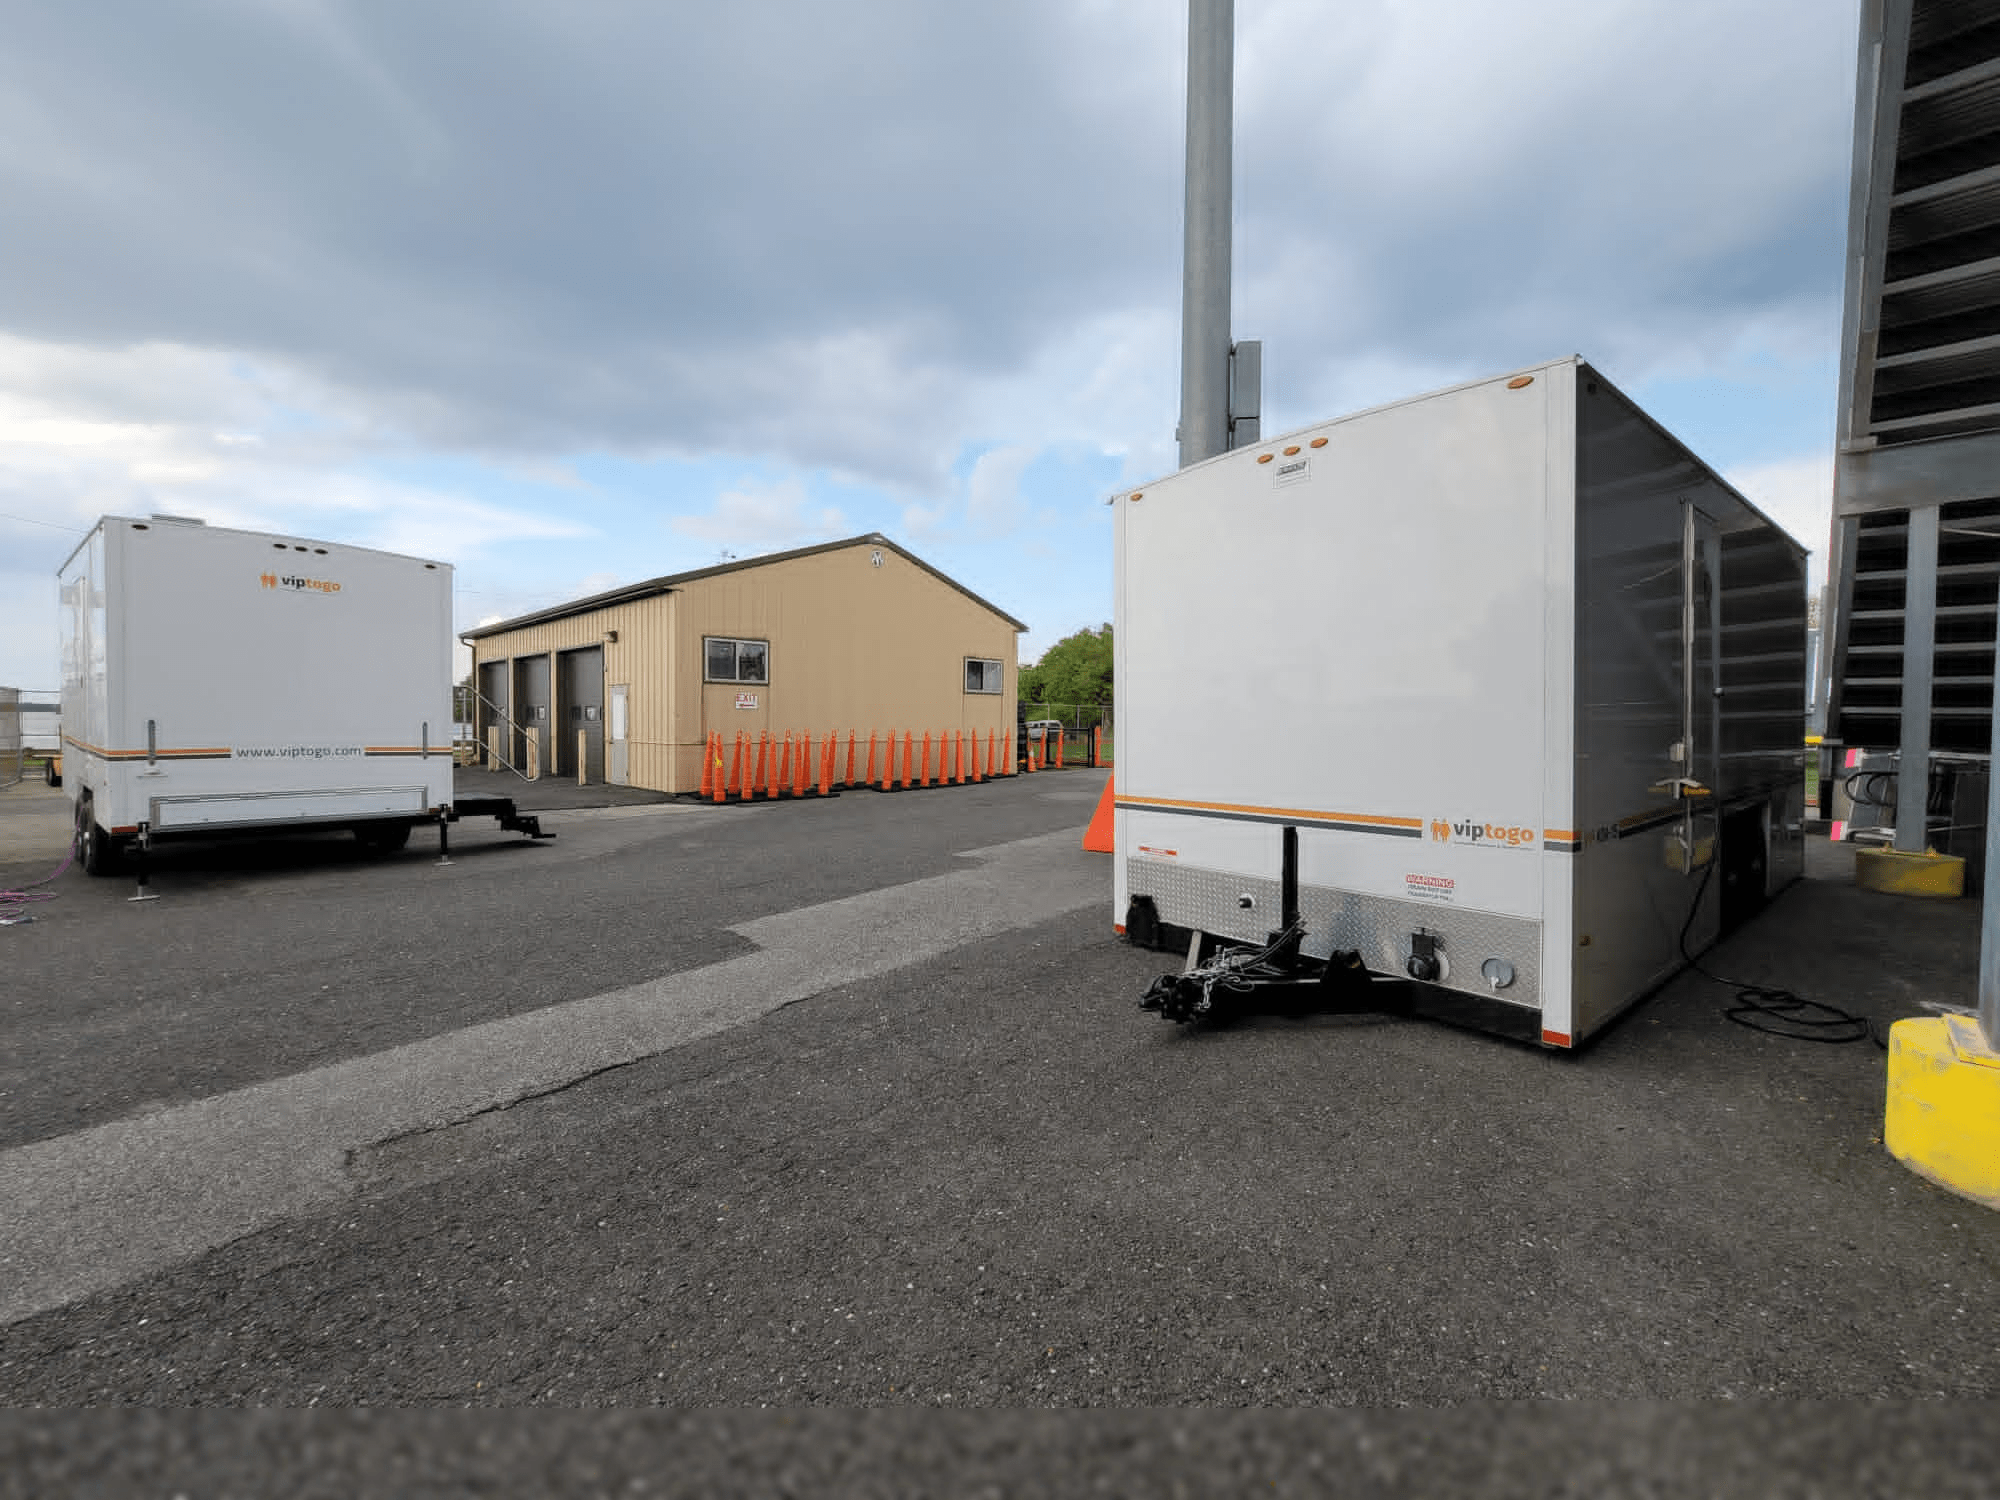 VIP To Go’s portable restroom trailer positioned at an outdoor setting